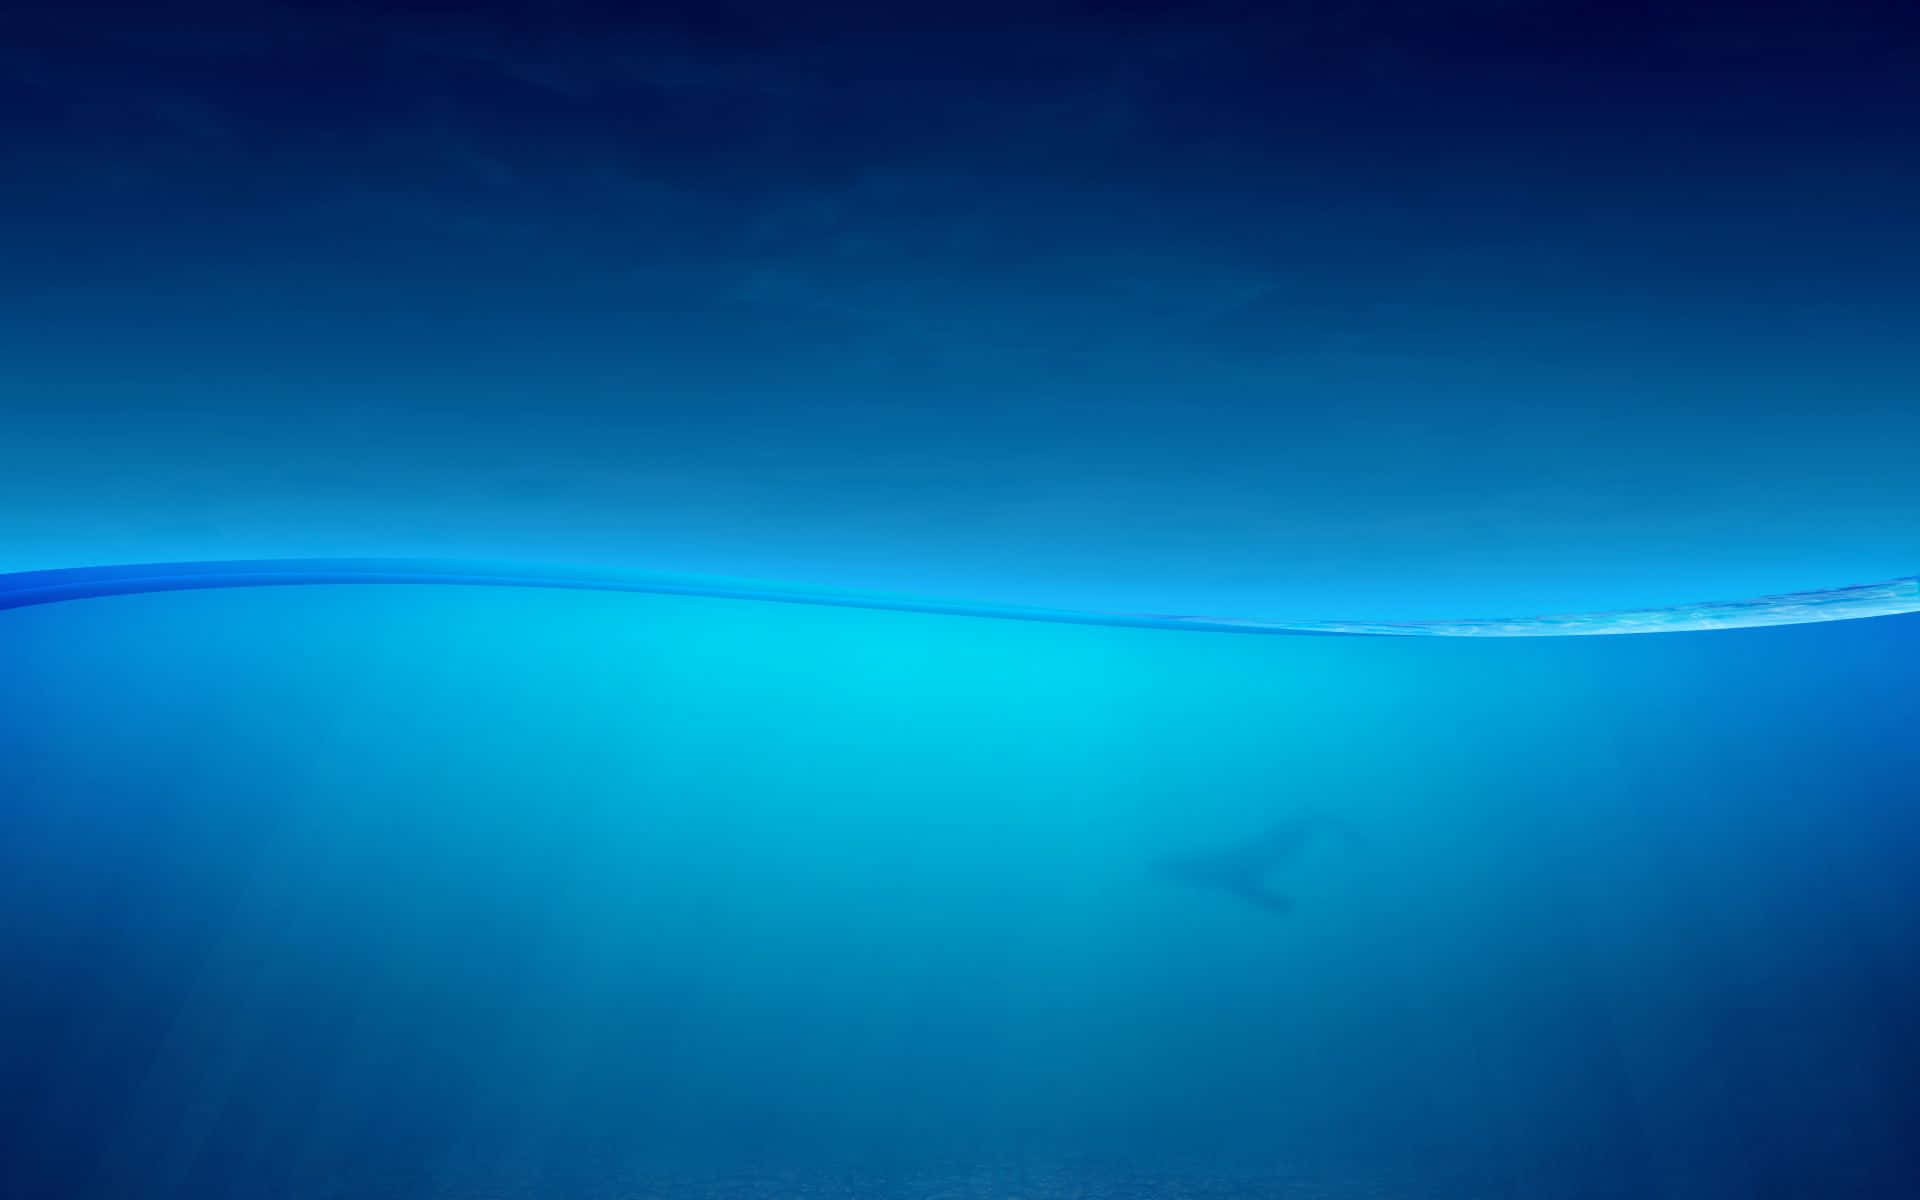 "Explore the beauty of the Ocean Blue"